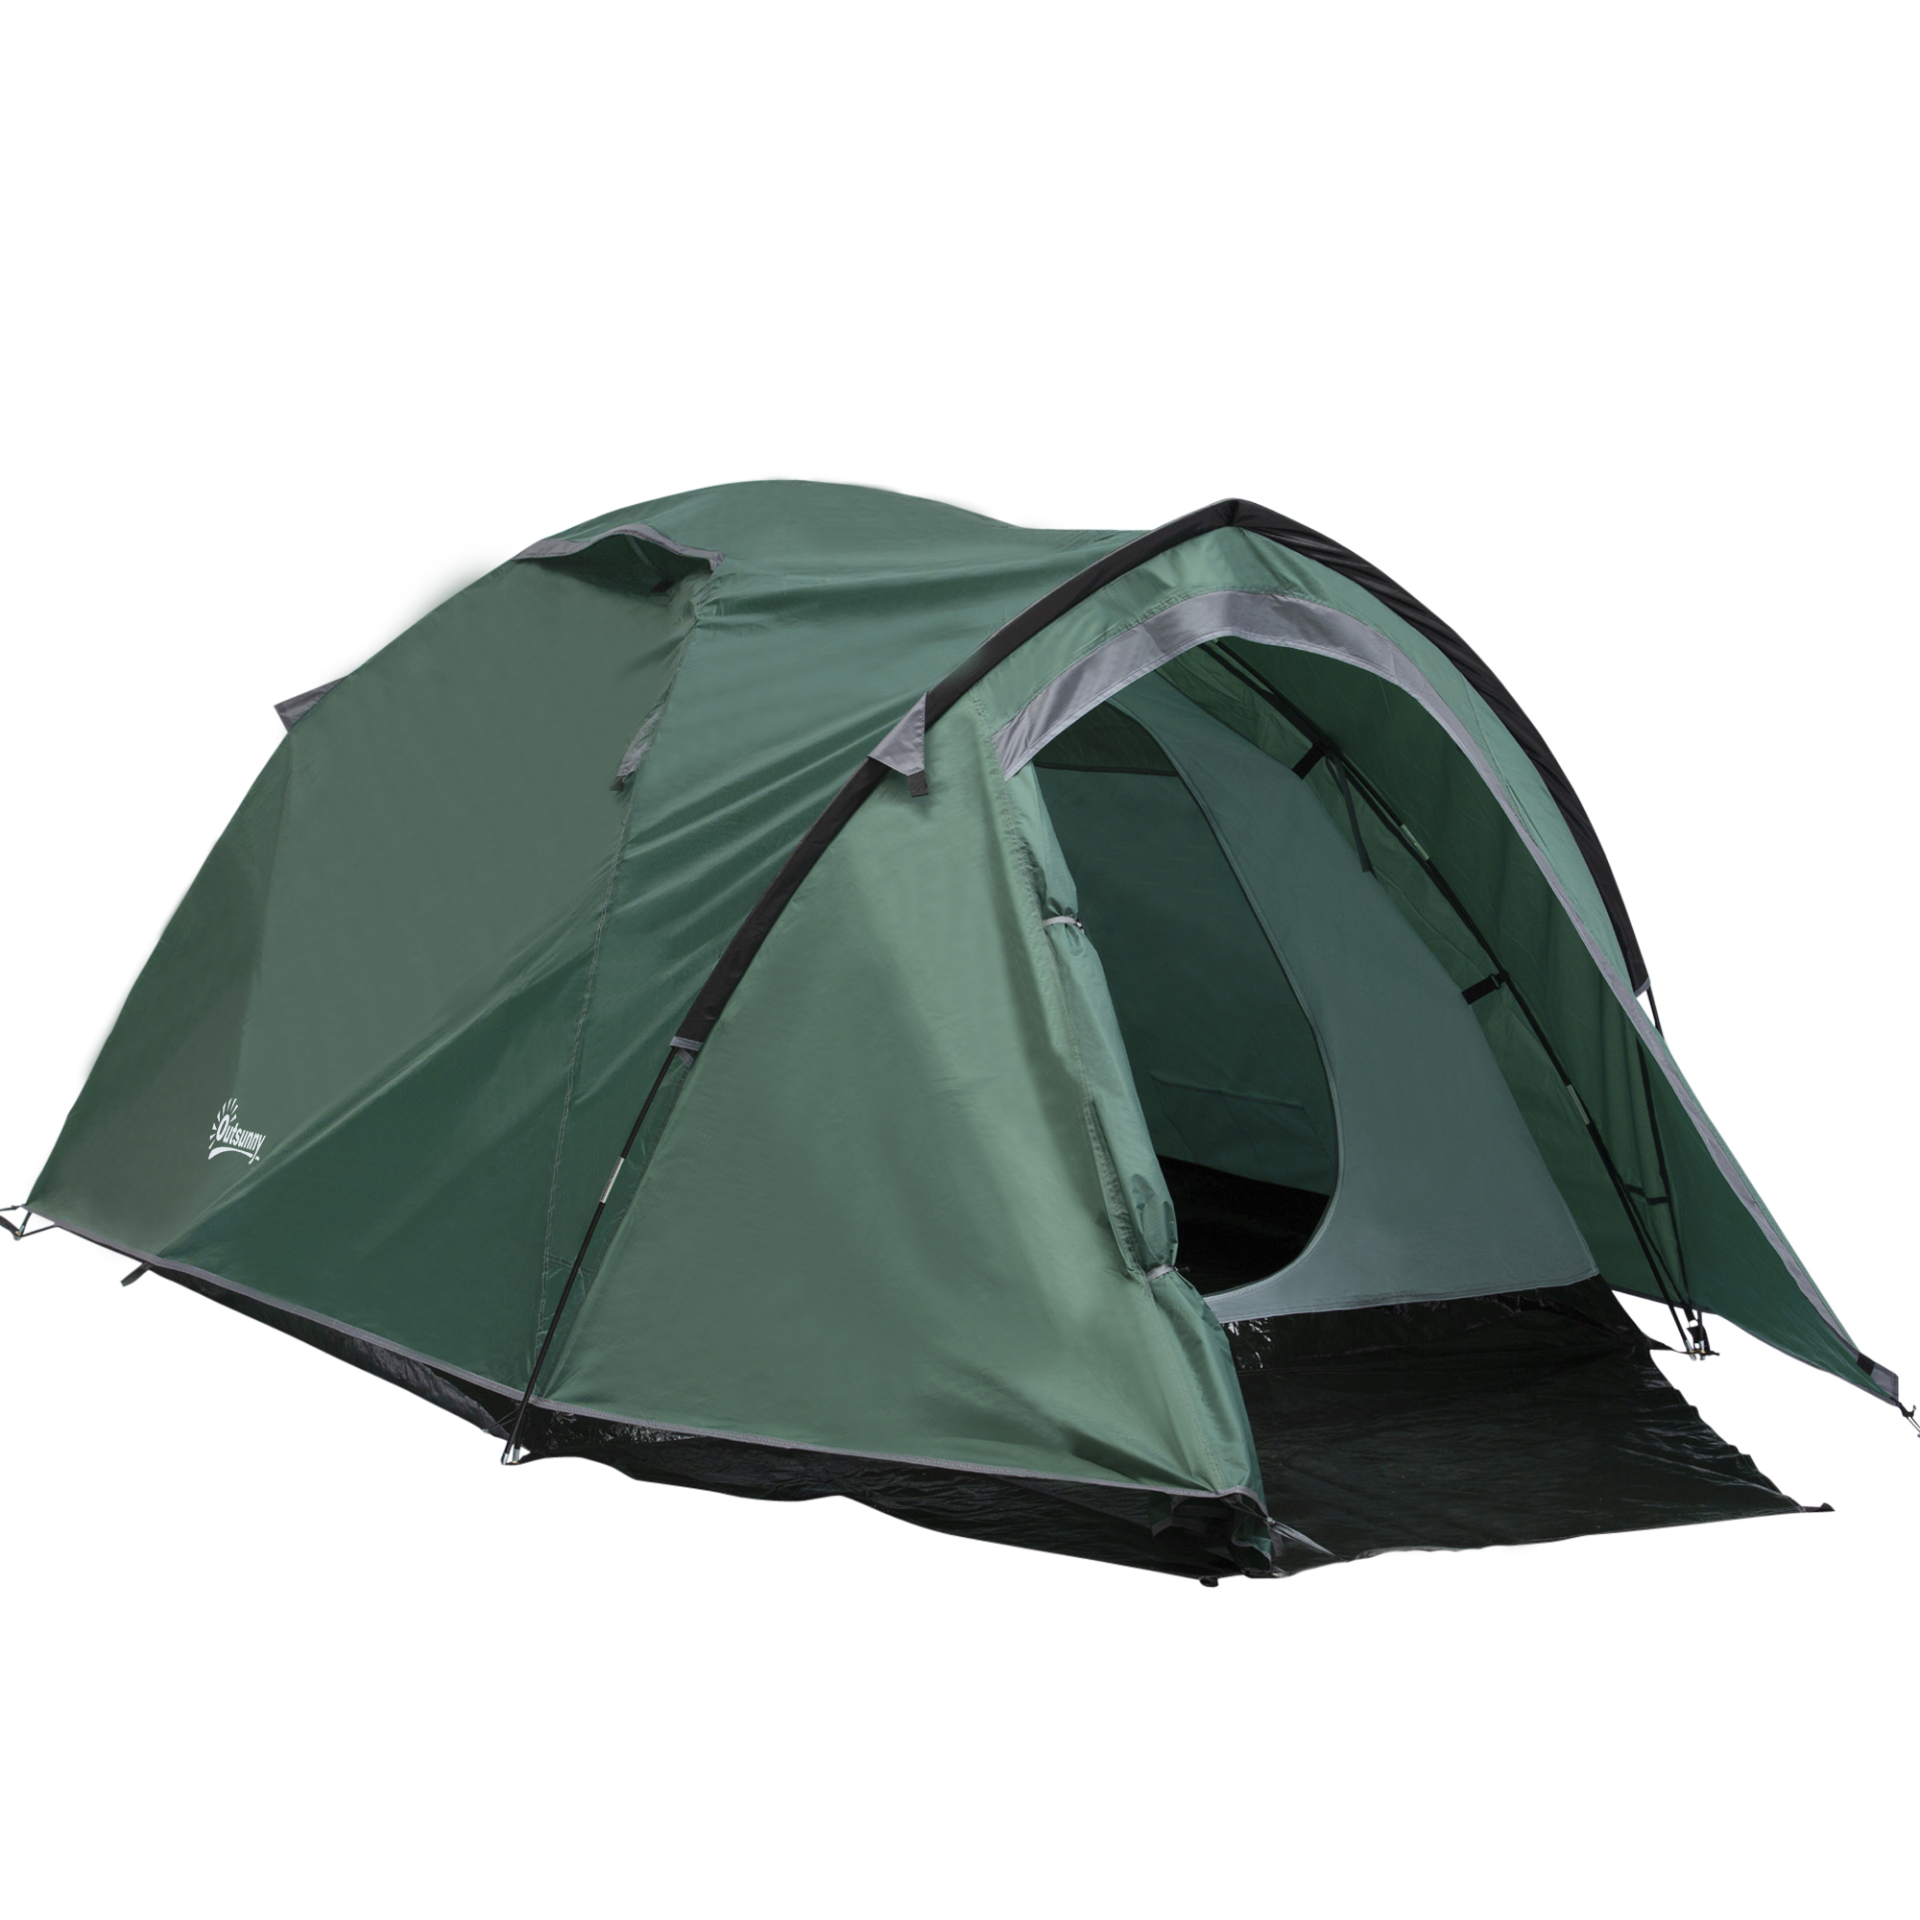 Outsunny Camping Tent w/ Dome Tent for 2-3 Person with Weatherproof Vestibule Ba